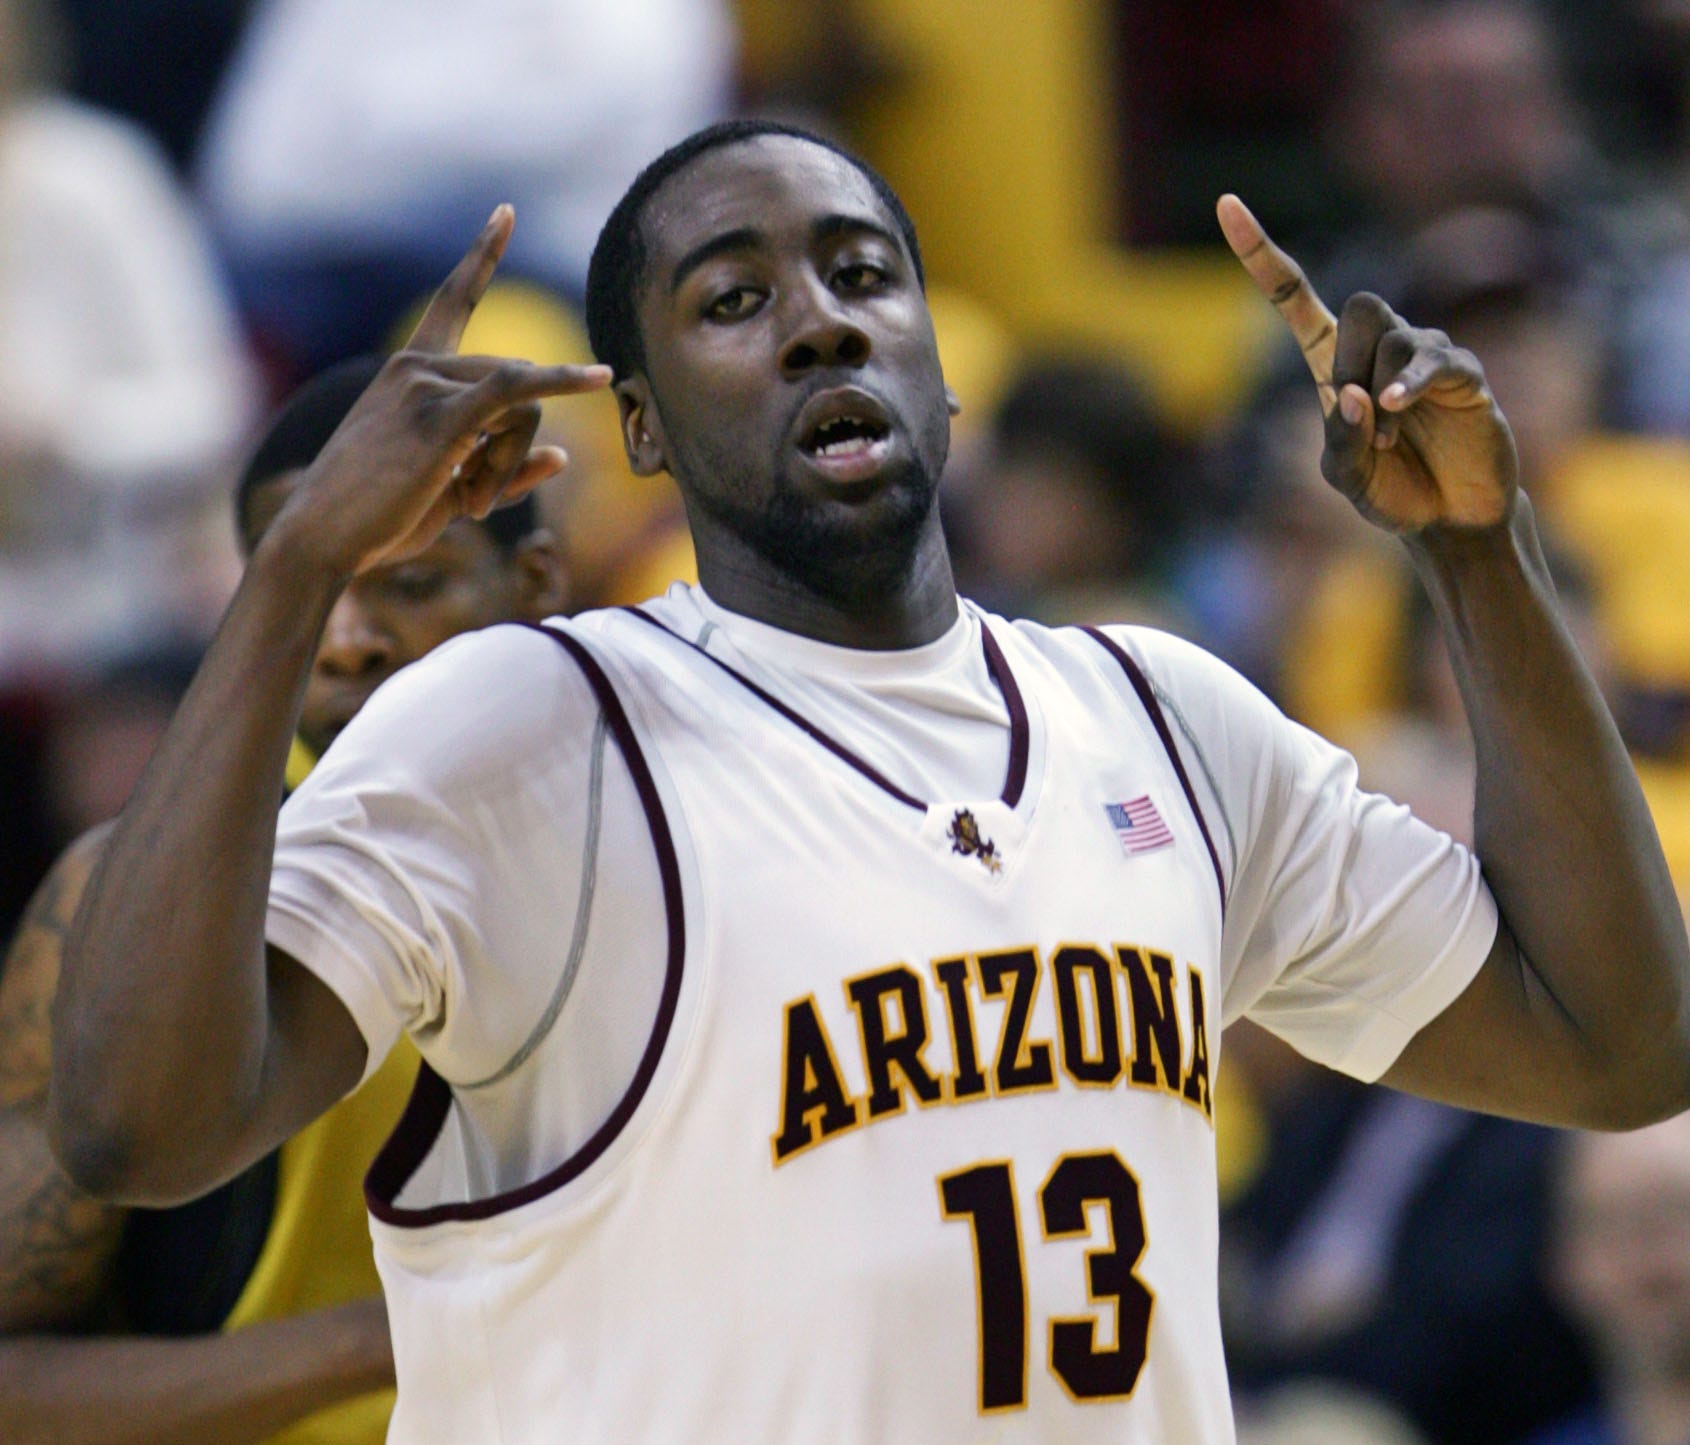 James Harden's jersey number retired at Arizona State